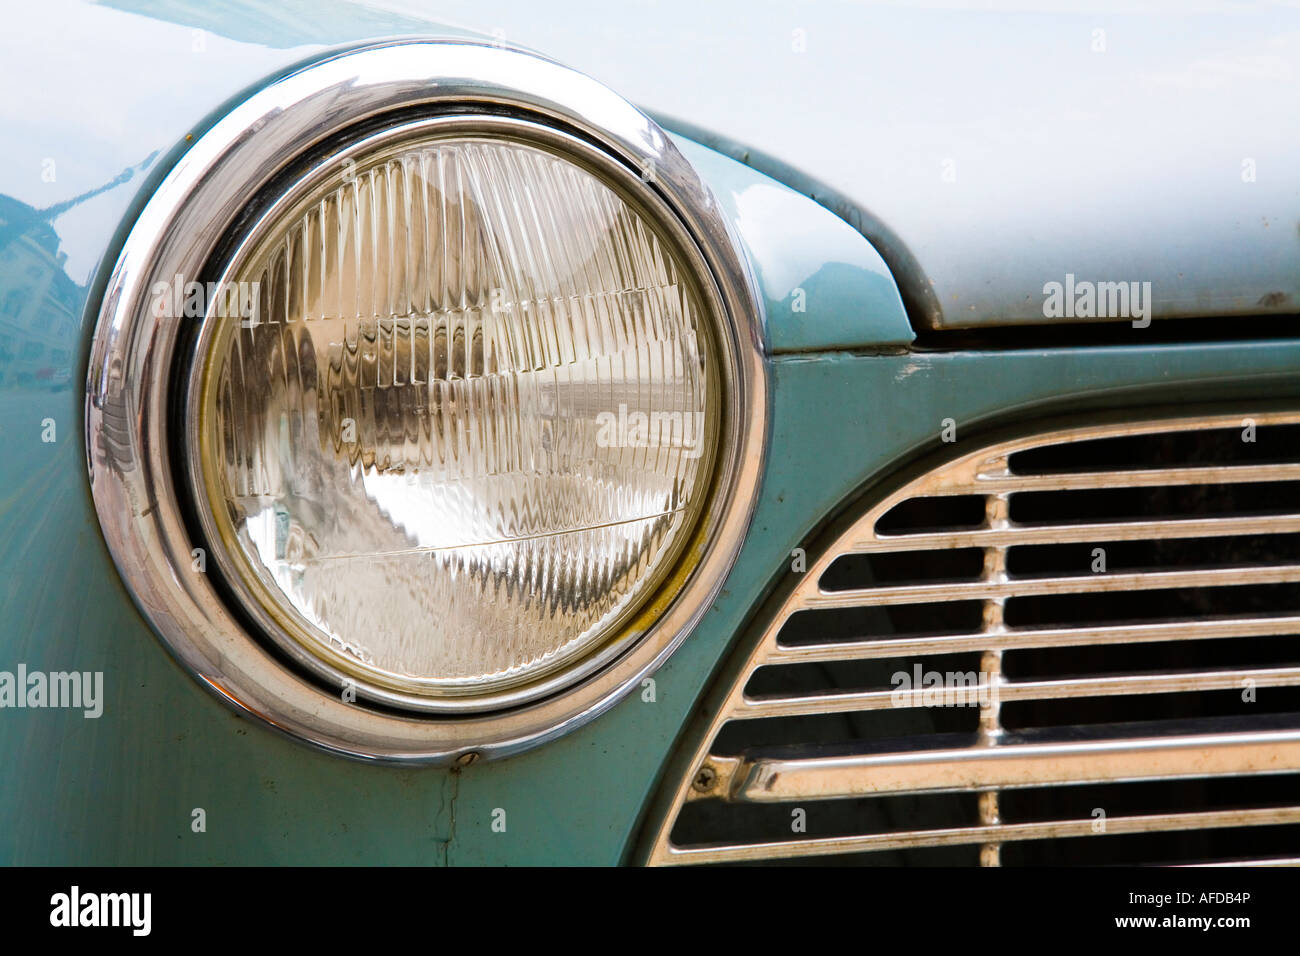 Detail of a vintage car headlight and front grille Stock Photo - Alamy